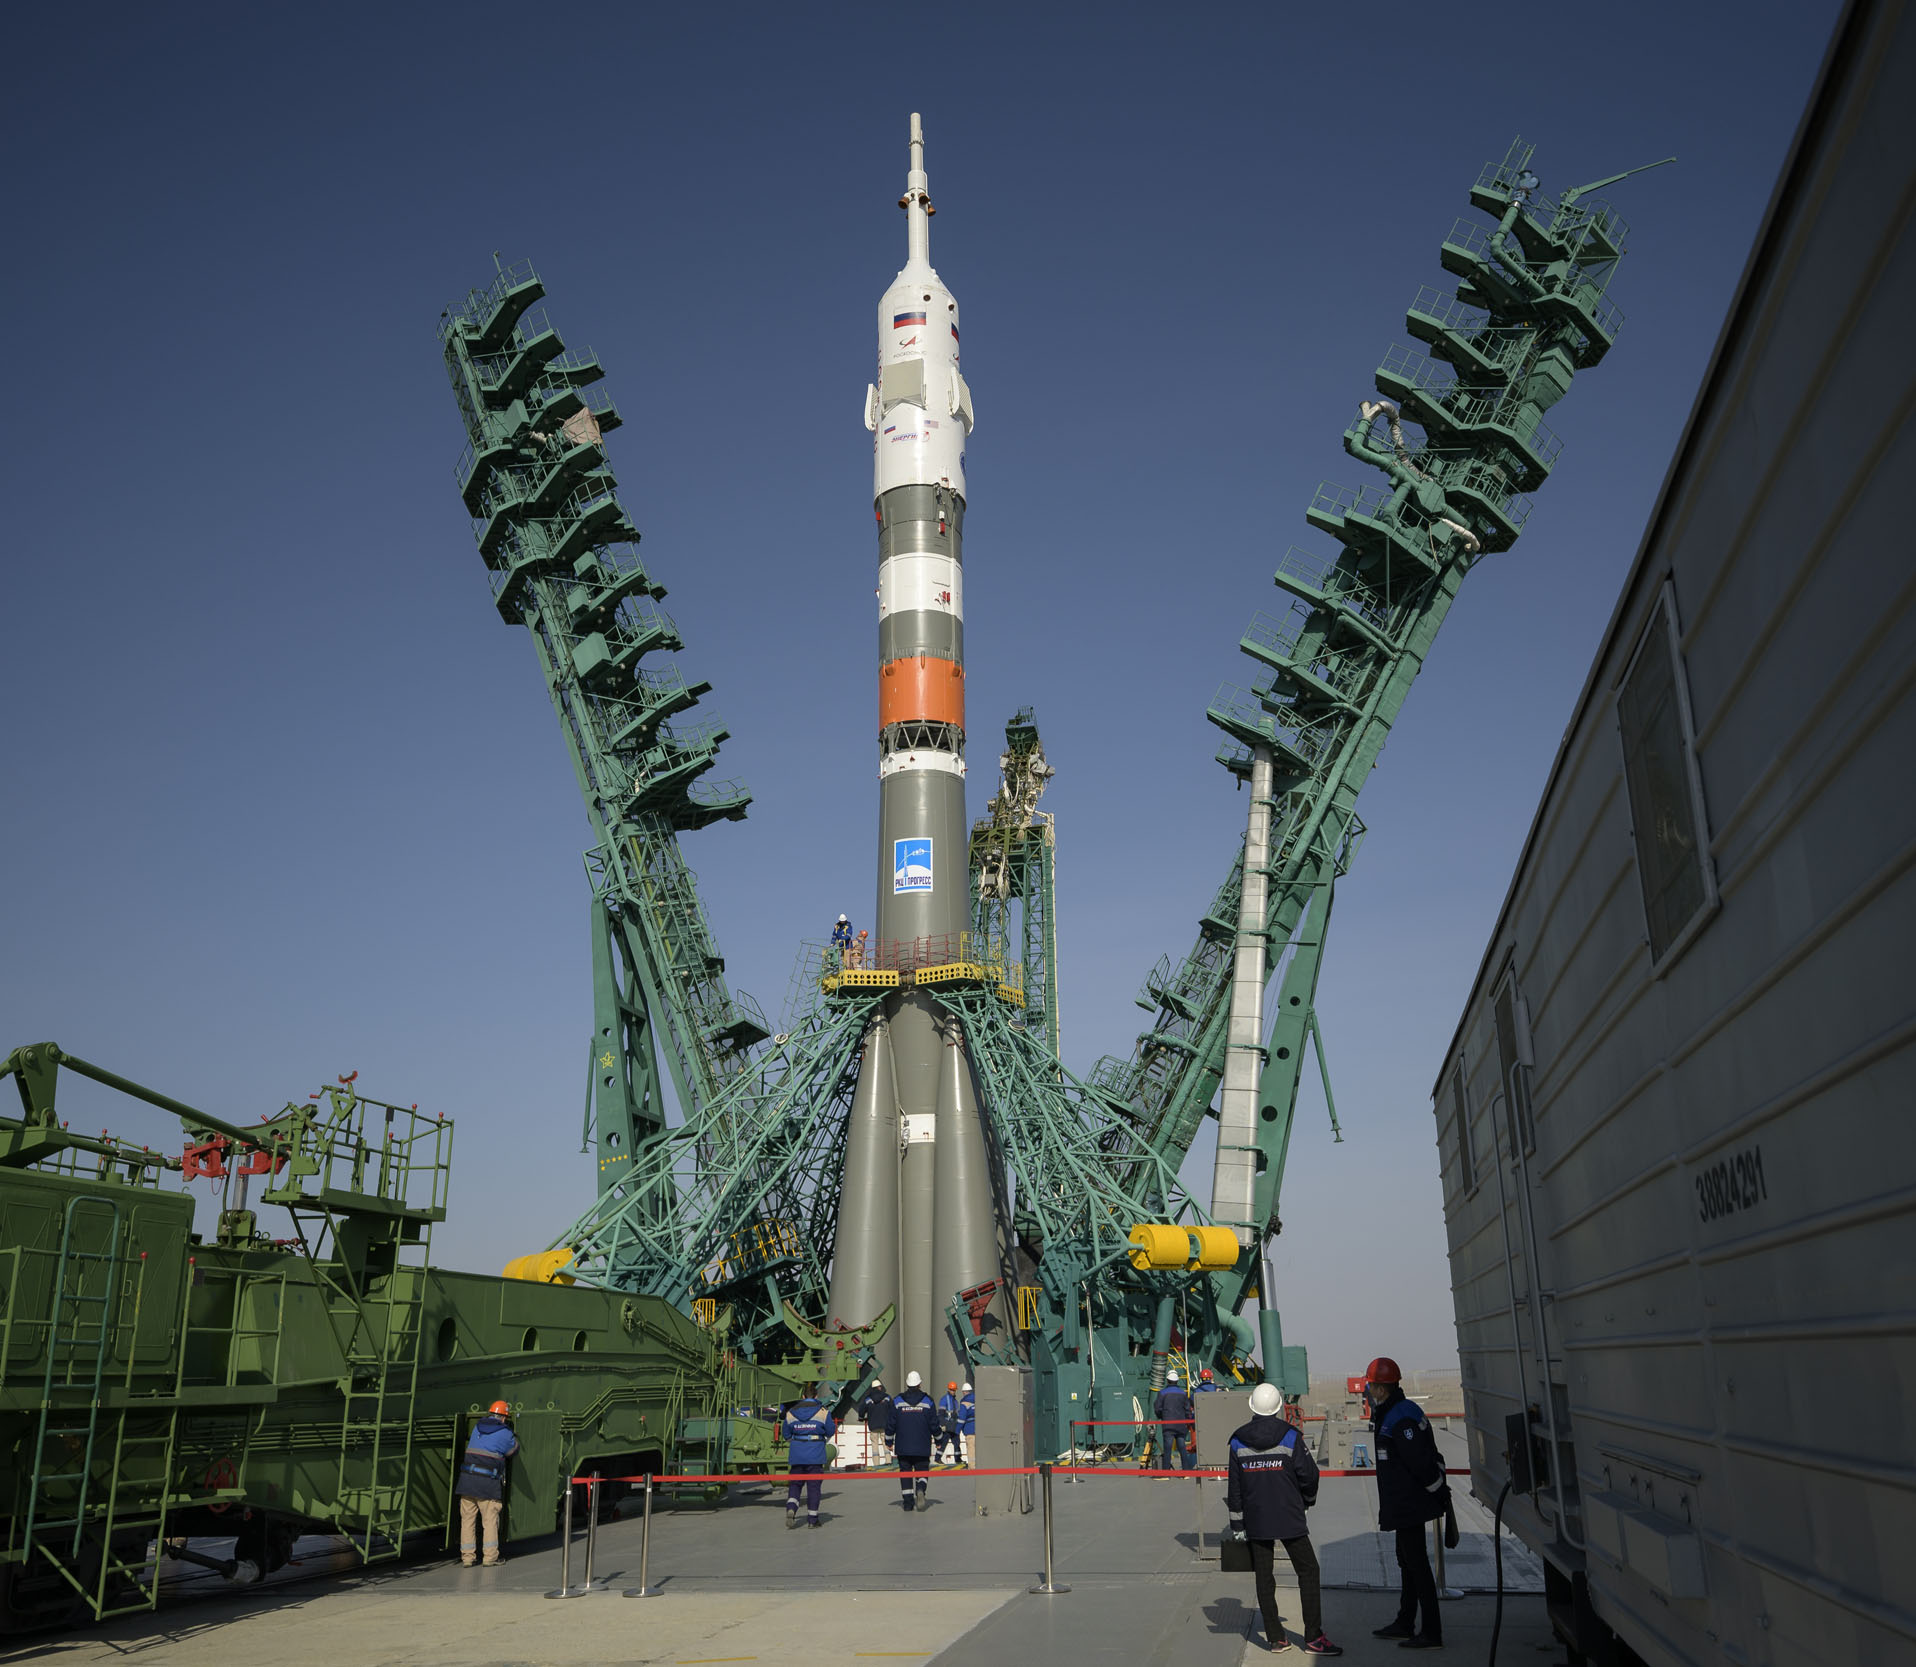 A handout photo made available by NASA shows the service structure being lifted into position around the Soyuz rocket at the launch pad at Site 31 at the Baikonur Cosmodrome in Kazakhstan, 06 April 2021. Expedition 65 NASA astronaut Mark Vande Hei, Roscosmos cosmonauts Pyotr Dubrov and Oleg Novitskiy are scheduled to launch aboard their Soyuz MS-18 spacecraft on 09 April. EPA-EFE/NASA/Bill Ingalls HANDOUT MANDATORY CREDIT: (NASA/Bill Ingalls) AFS 8/101 - Permanent HANDOUT EDITORIAL USE ONLY/NO SALES